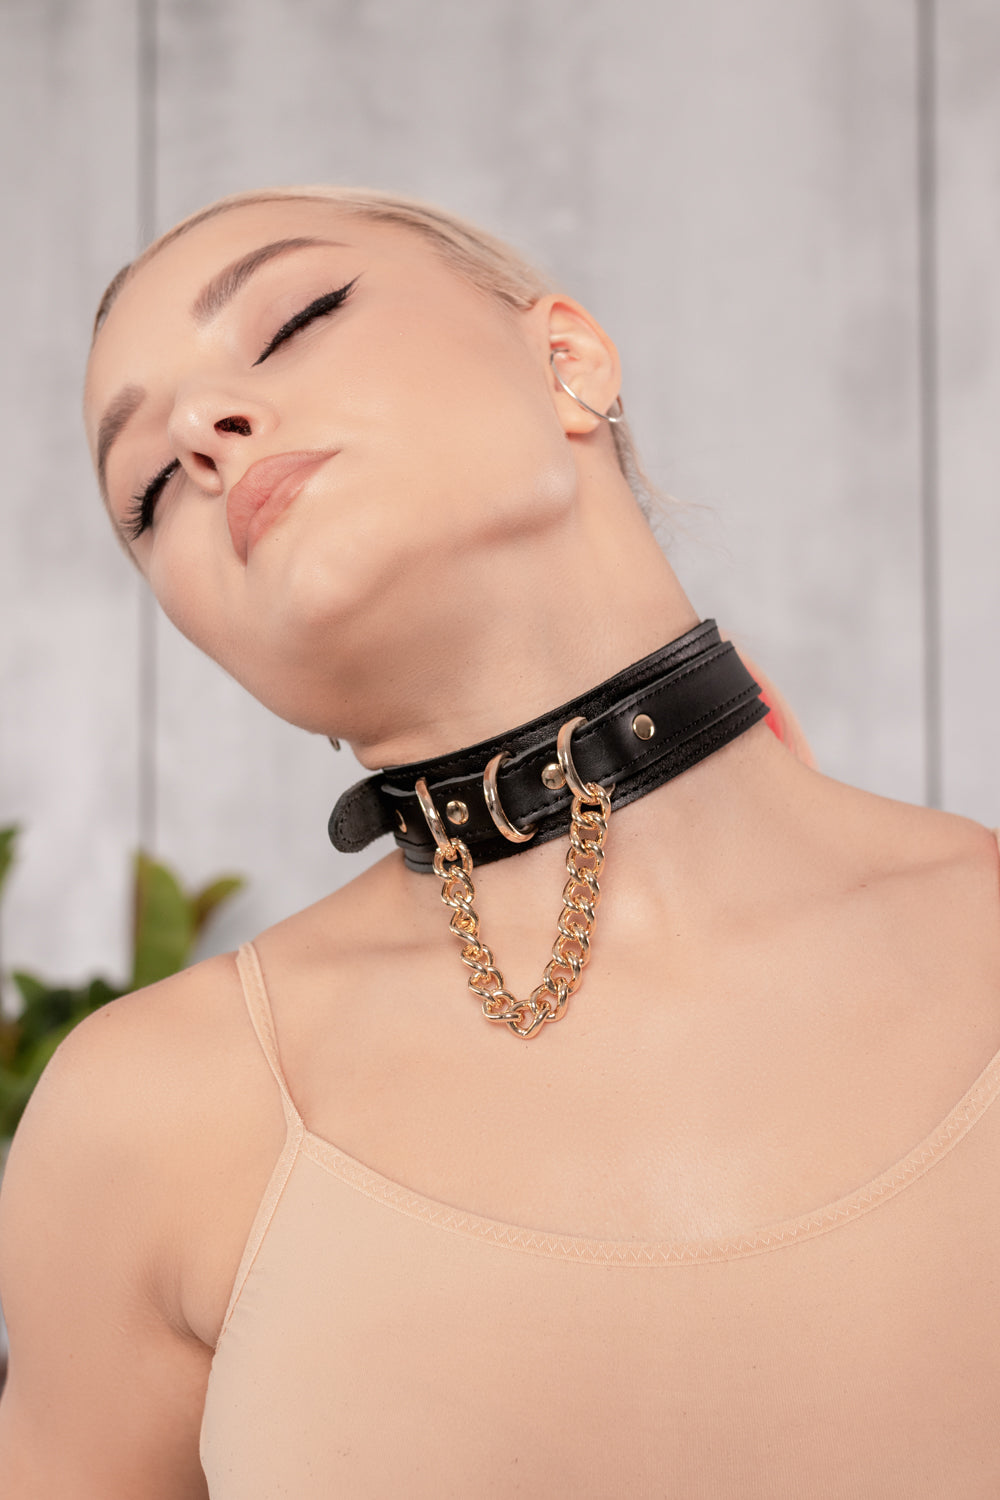 Leather Collar with D-rings and Chain